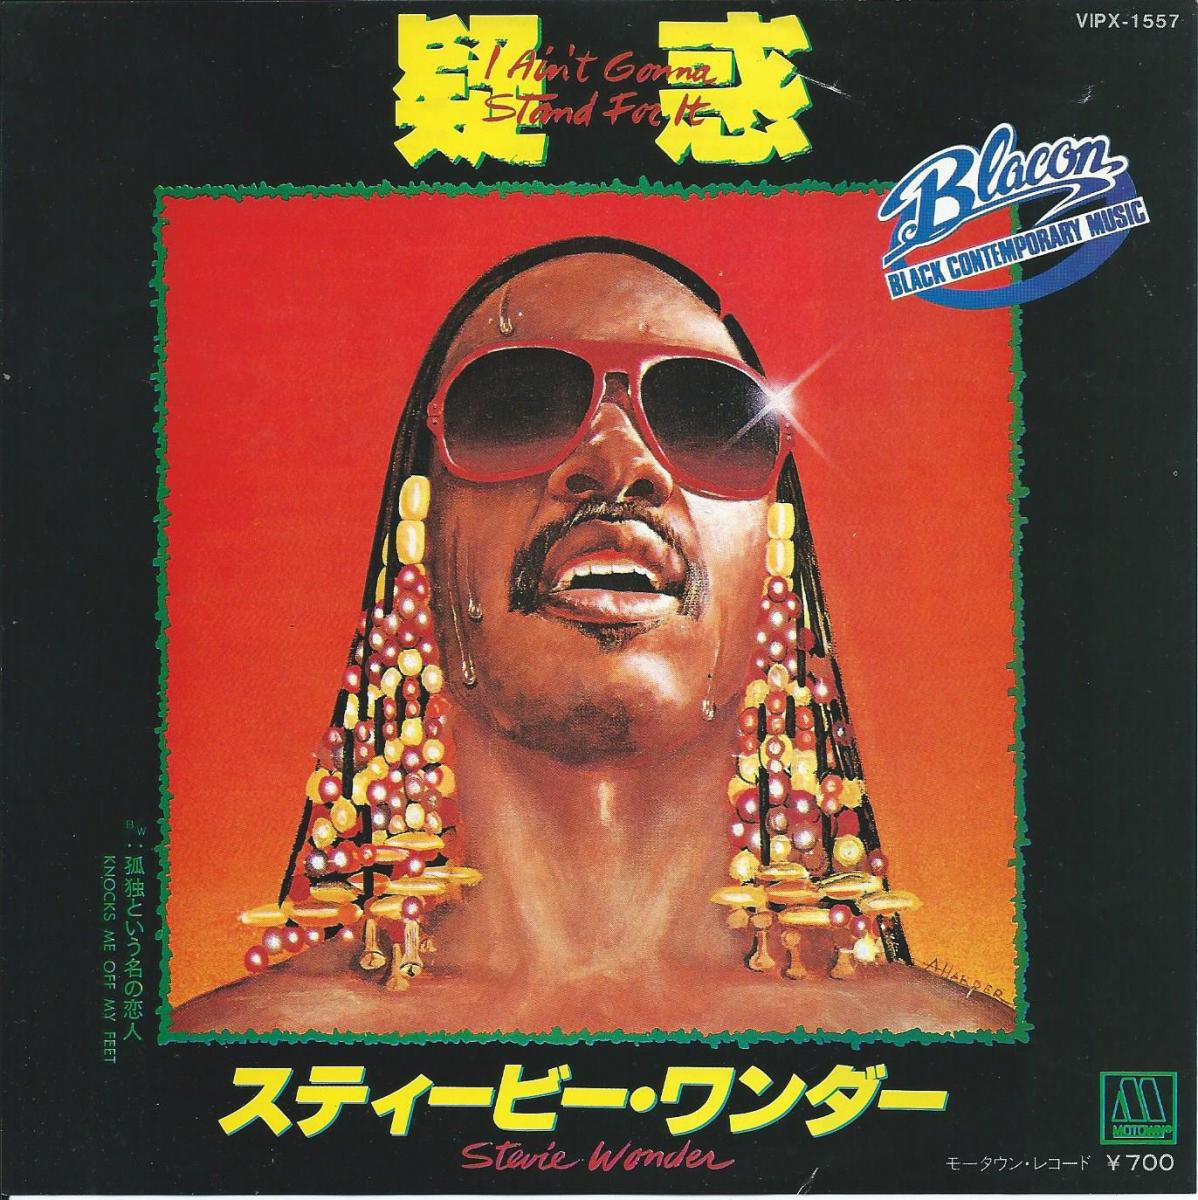 ƥӡ STEVIE WONDER /  I AIN'T GONNA STAND FOR IT (7